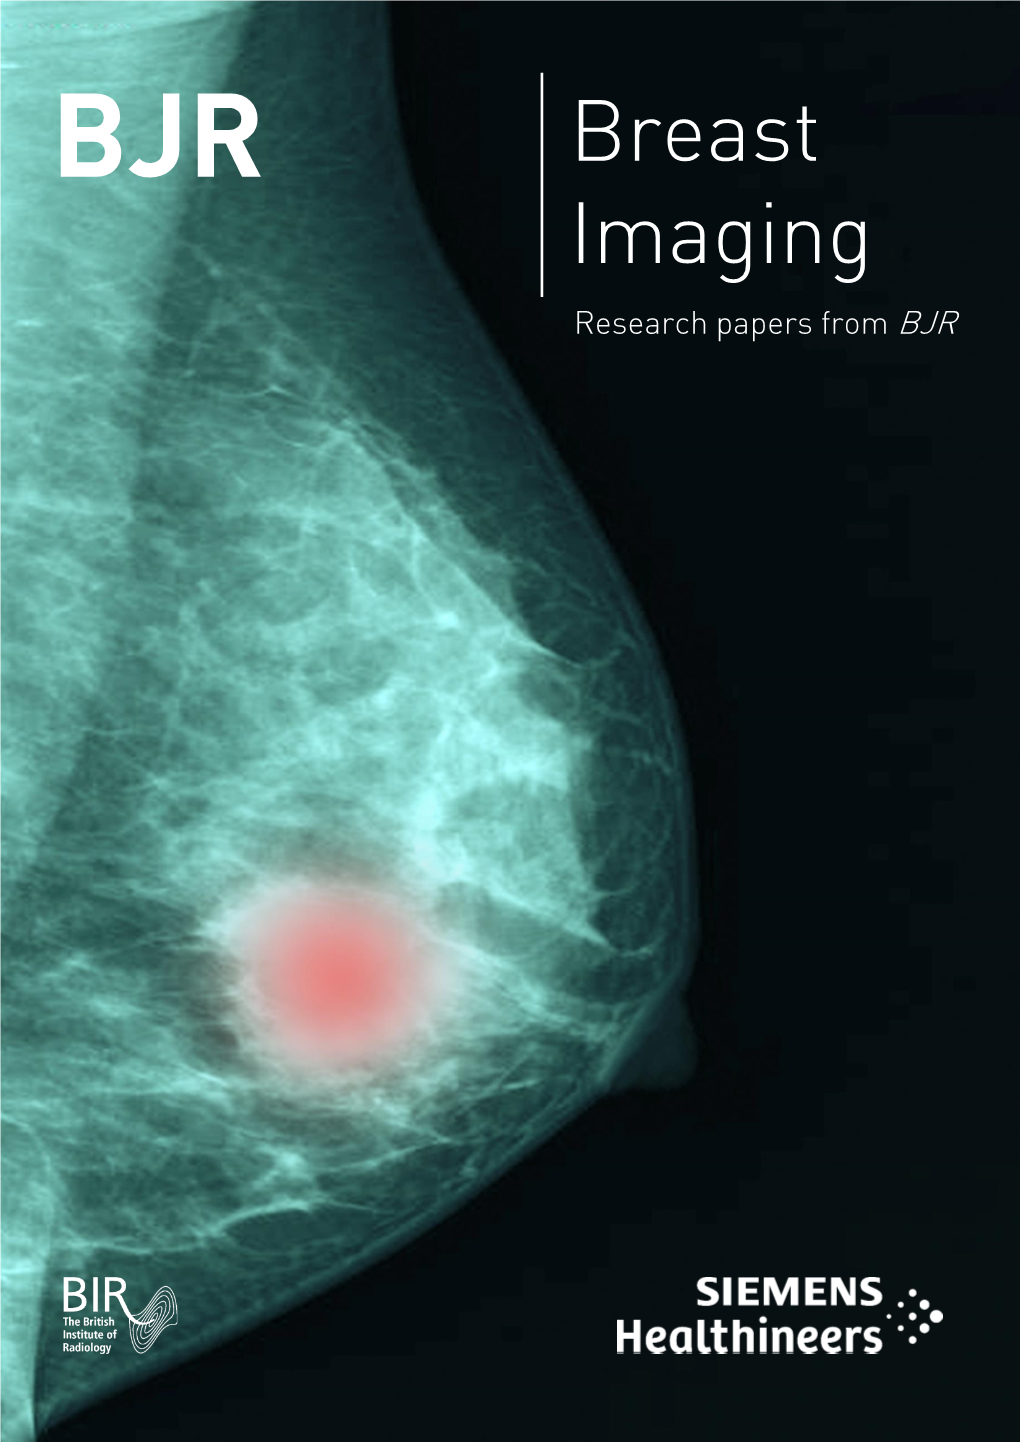 Breast Imaging Research Papers from BJR MAMMOMAT Revelation Inspect Integrated Specimen Scanner for Faster Biopsies